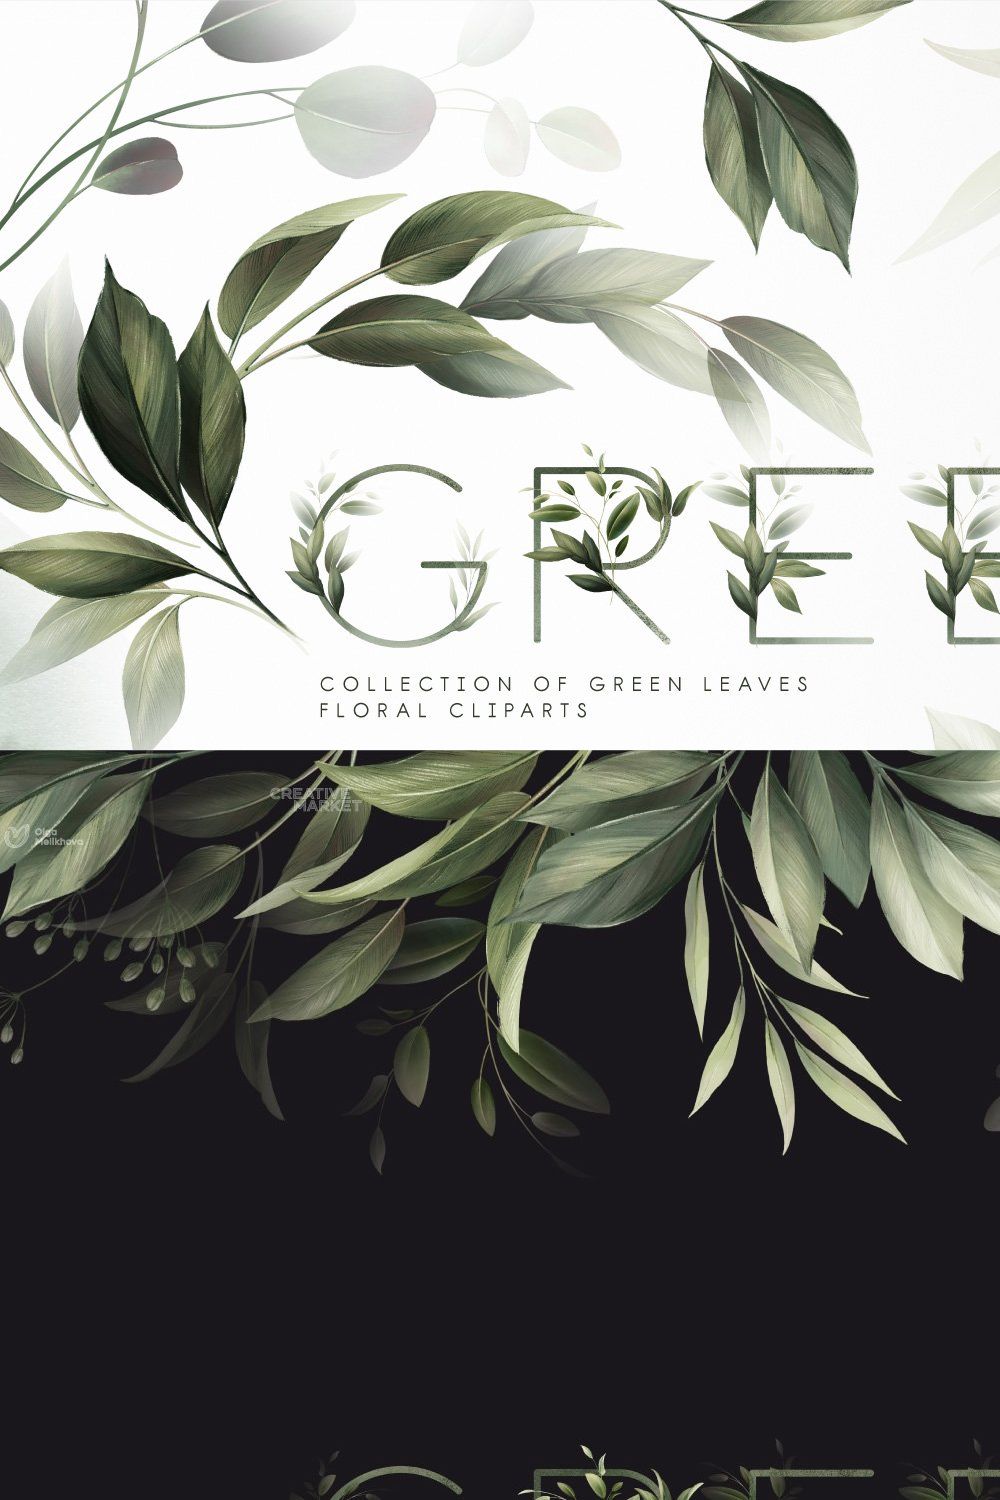 Green leaves - greenery clipart pinterest preview image.